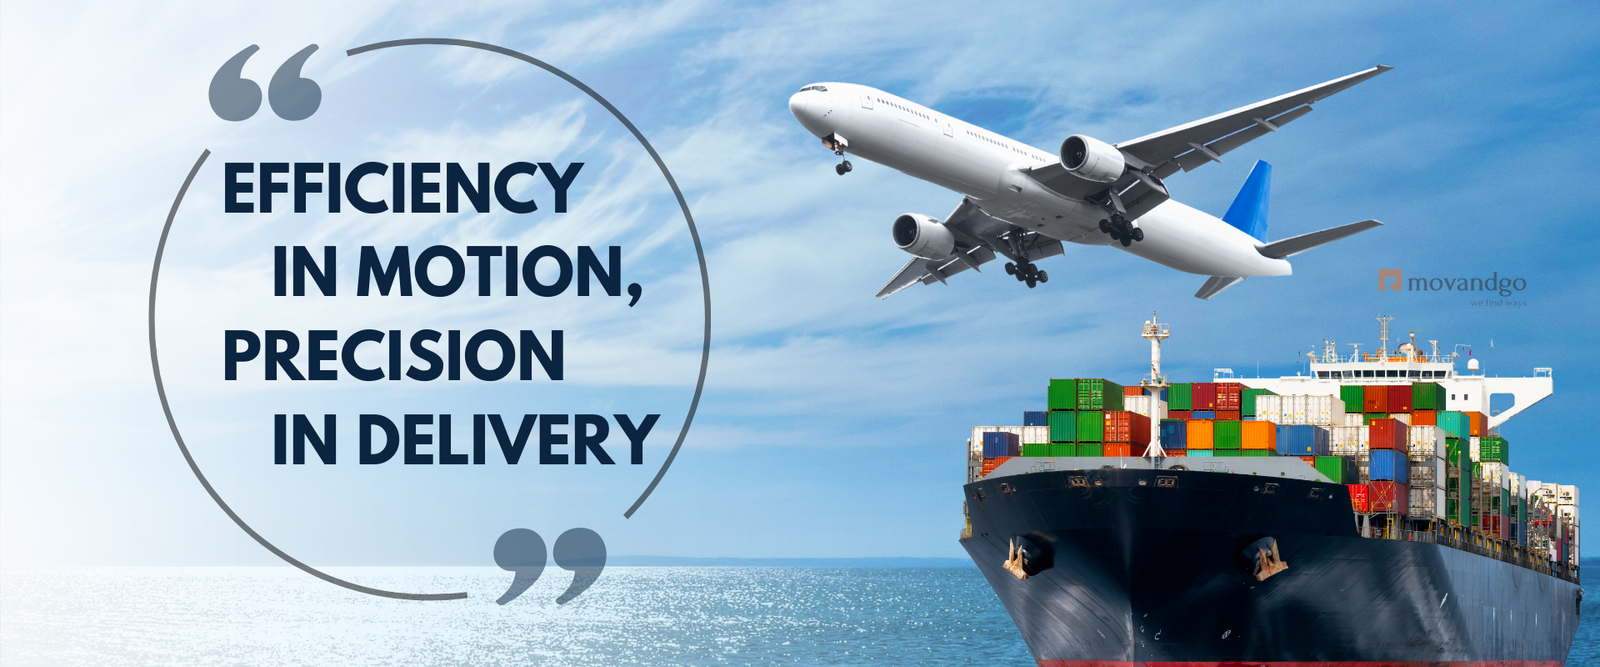 Efficiency in Motion, Precision in Delivery